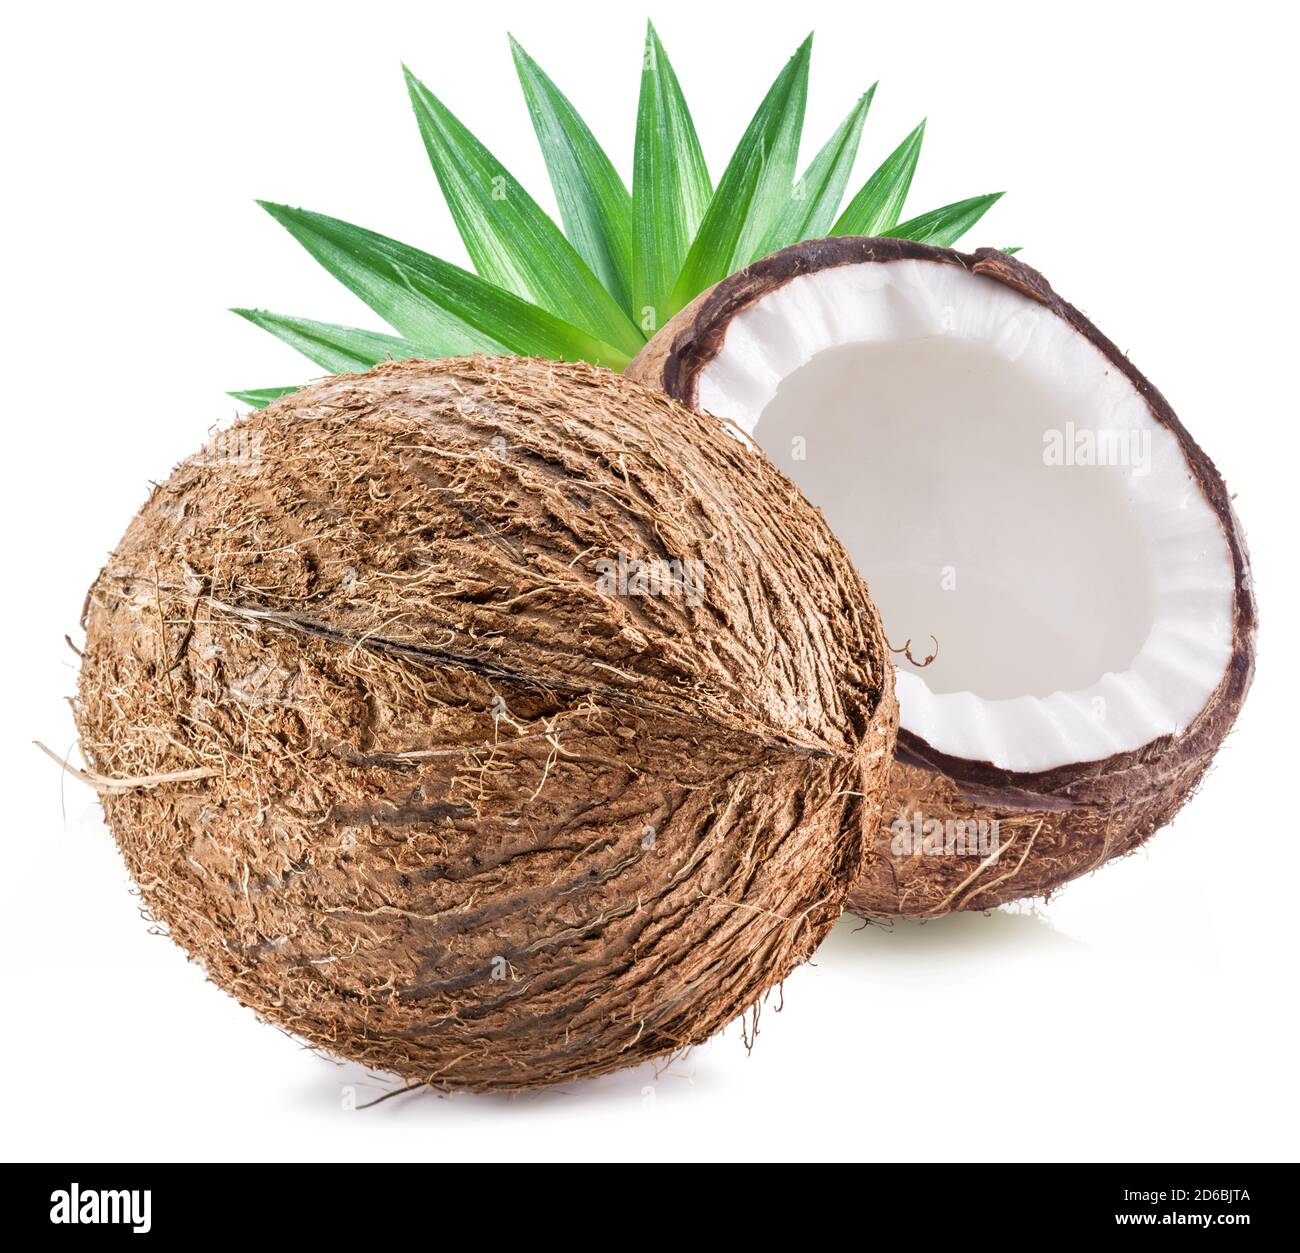 Cracked coconut fruit with white flesh and a whole coconut isolated on white background. Stock Photo